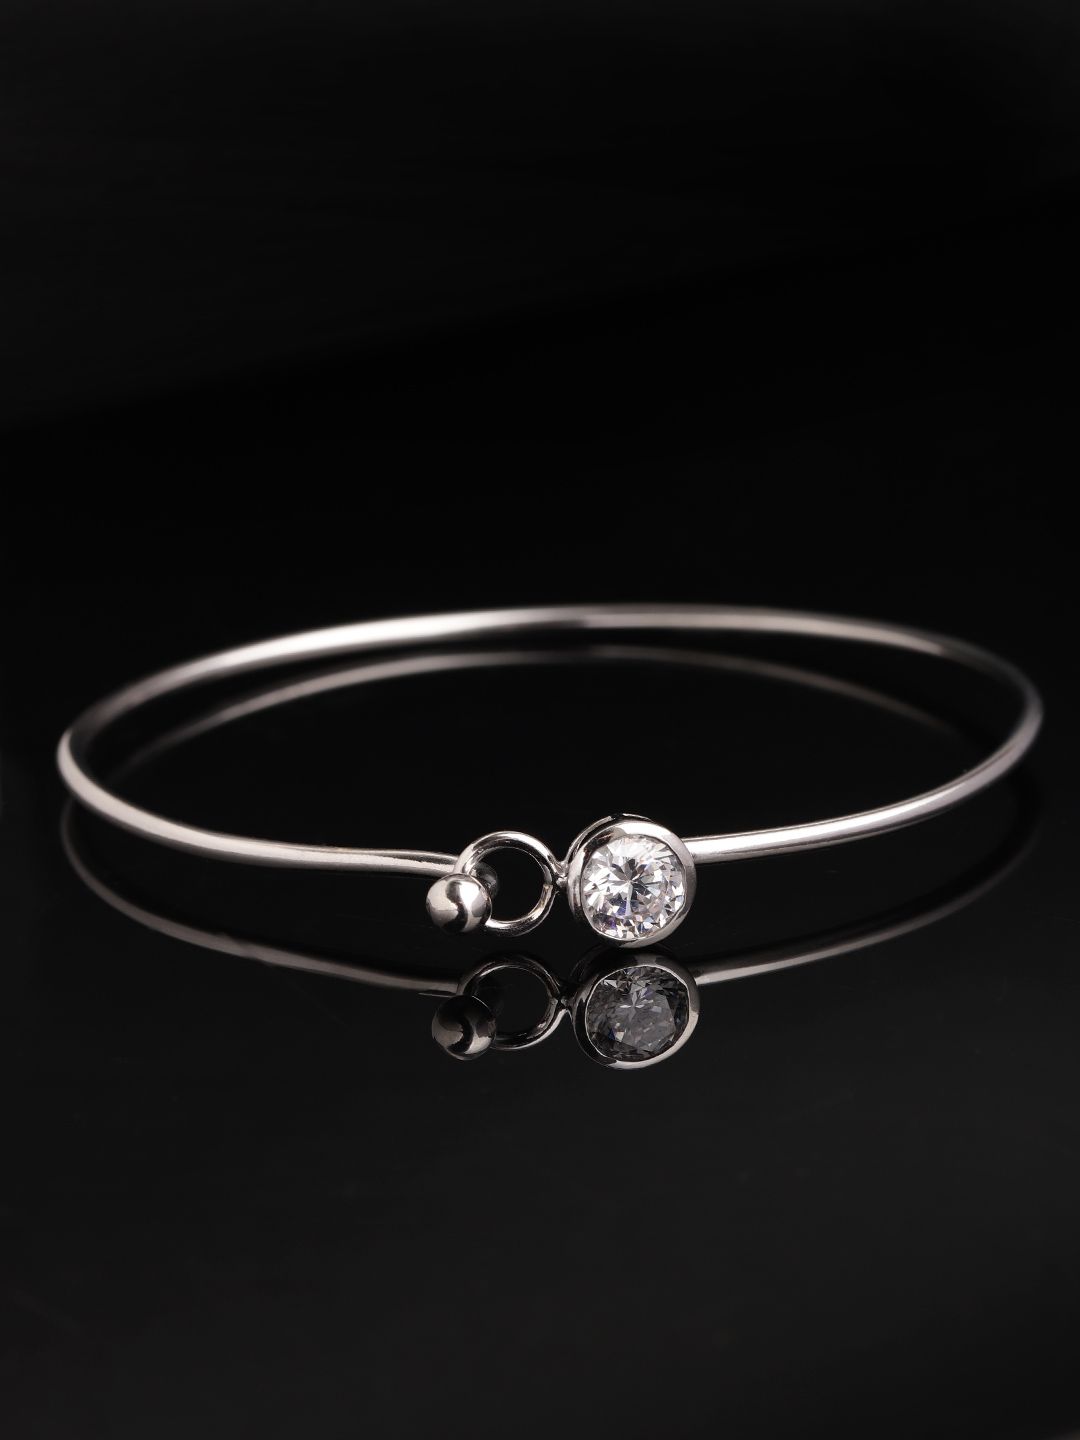 Carlton London Silver-Toned Rhodium-Plated CZ Studded Bangle-Style Bracelet Price in India